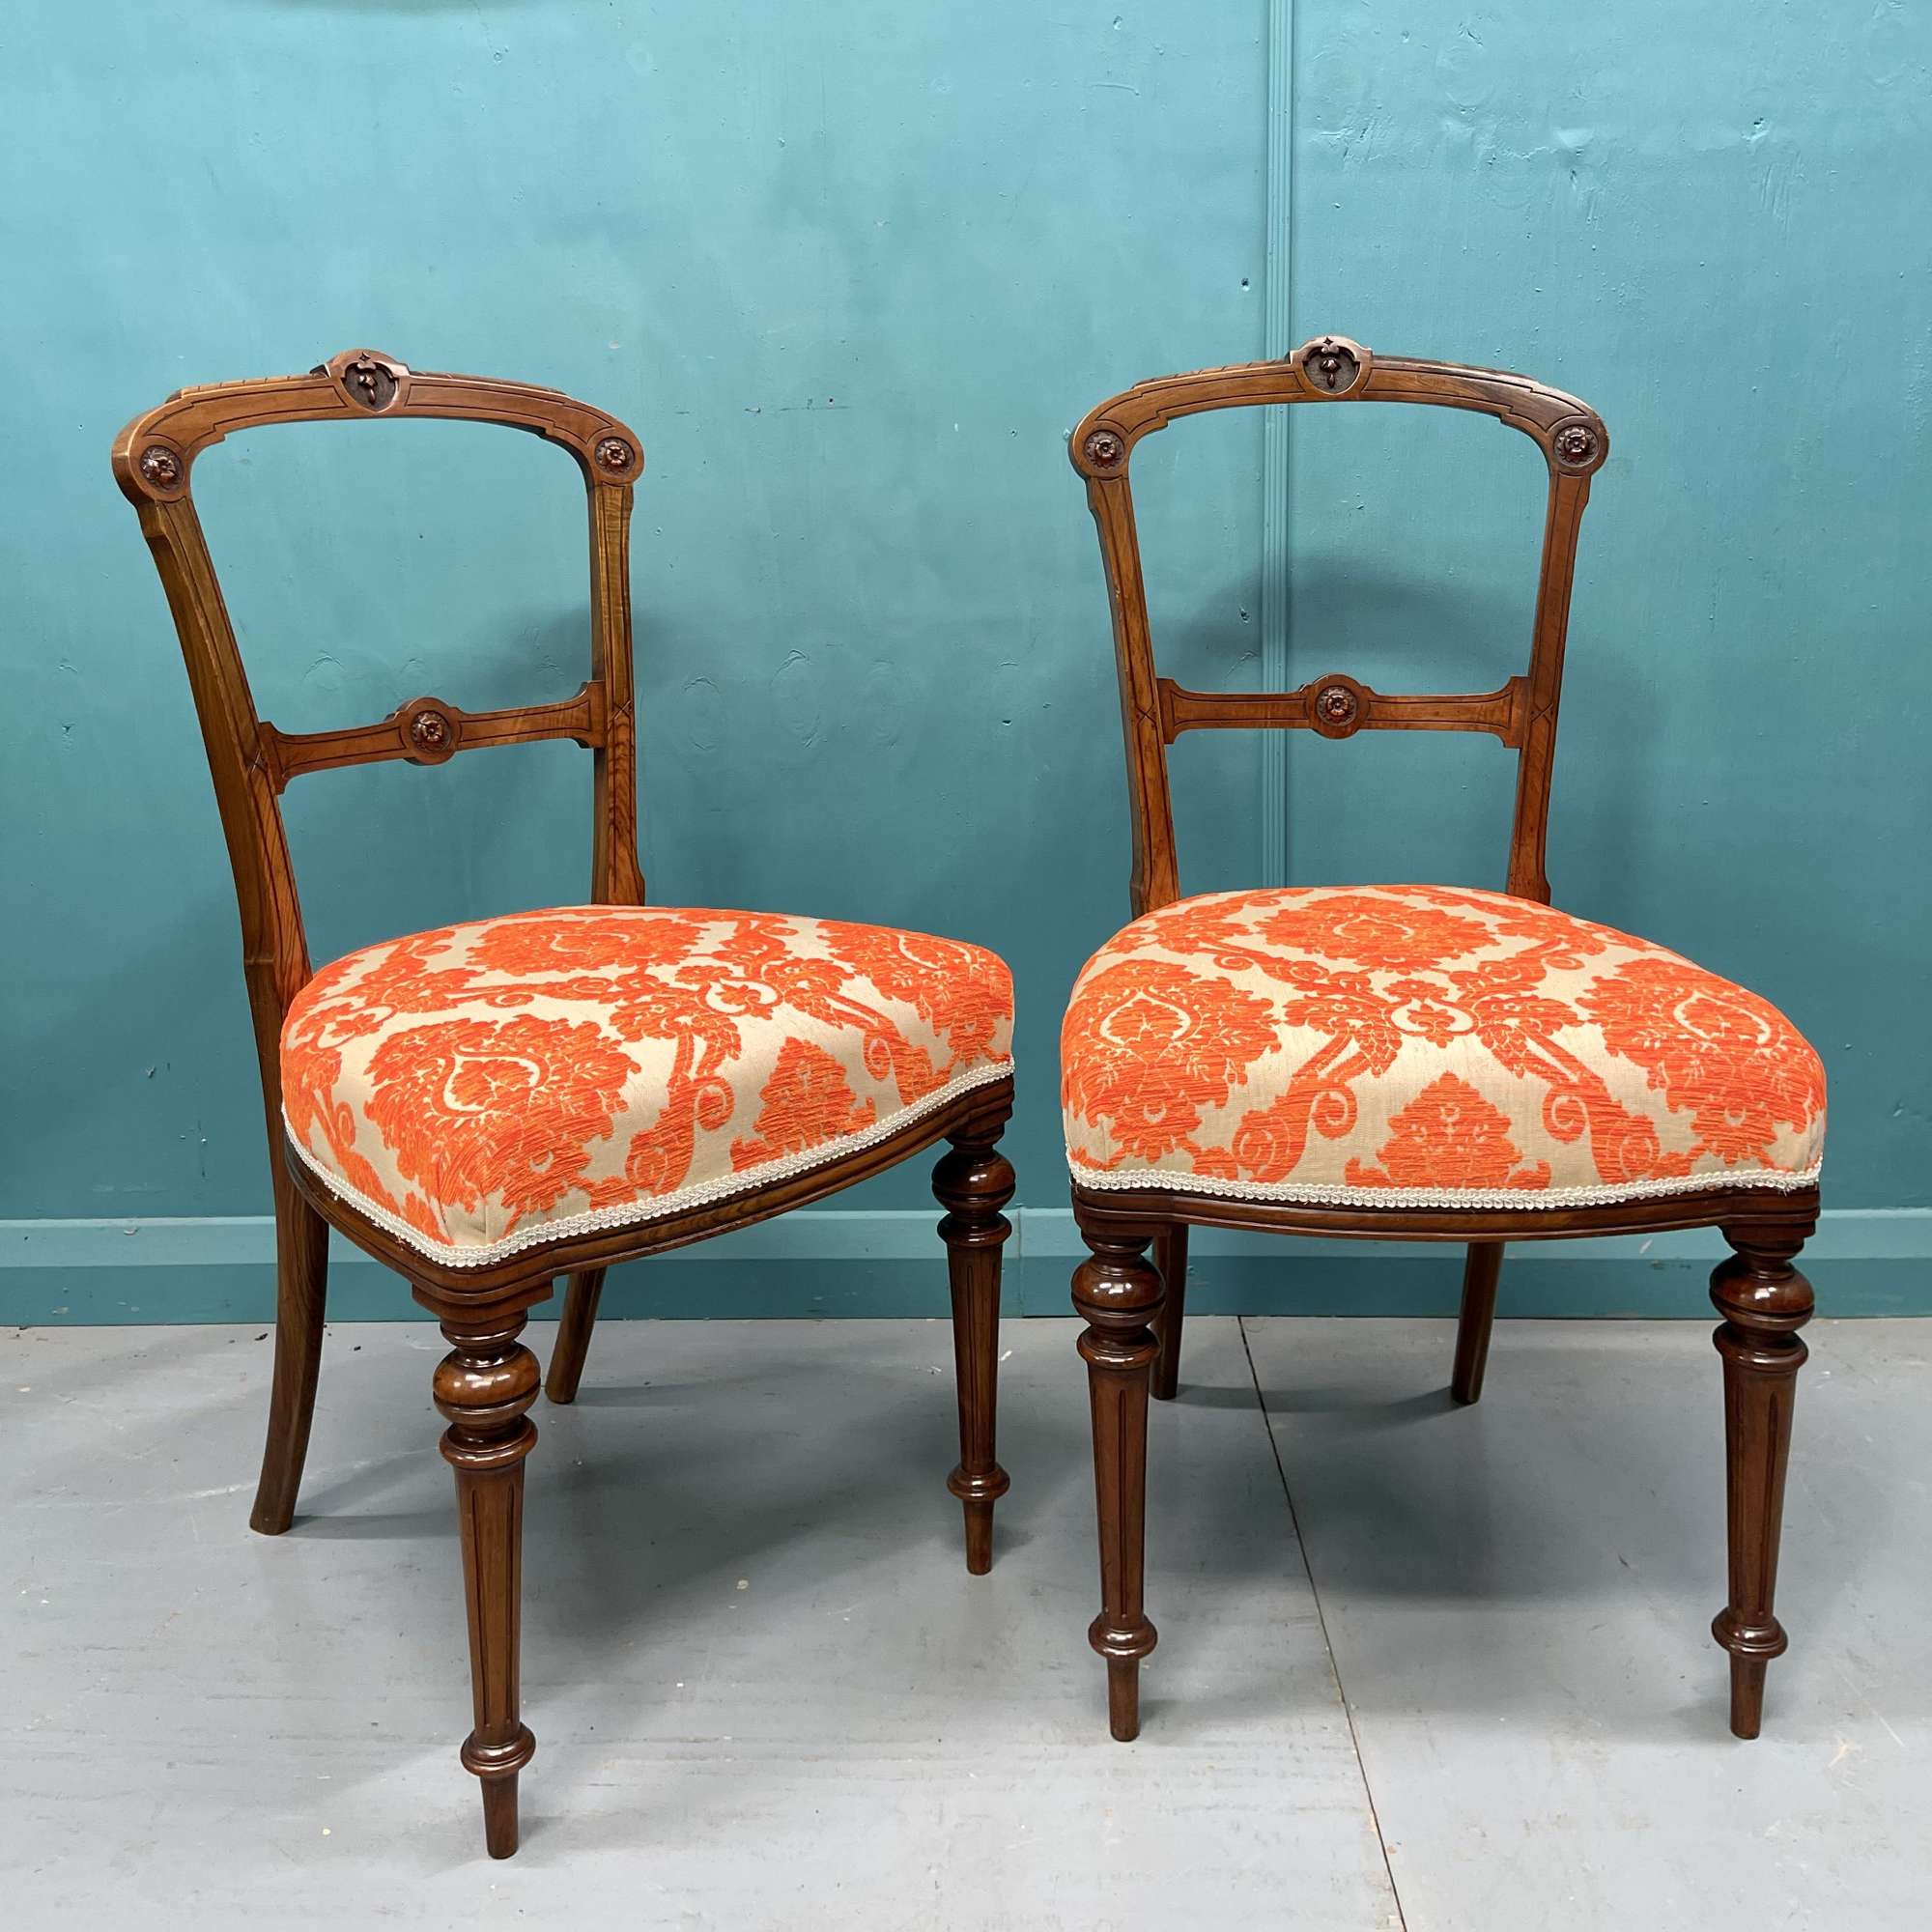 Pair of newly upholstered side chairs